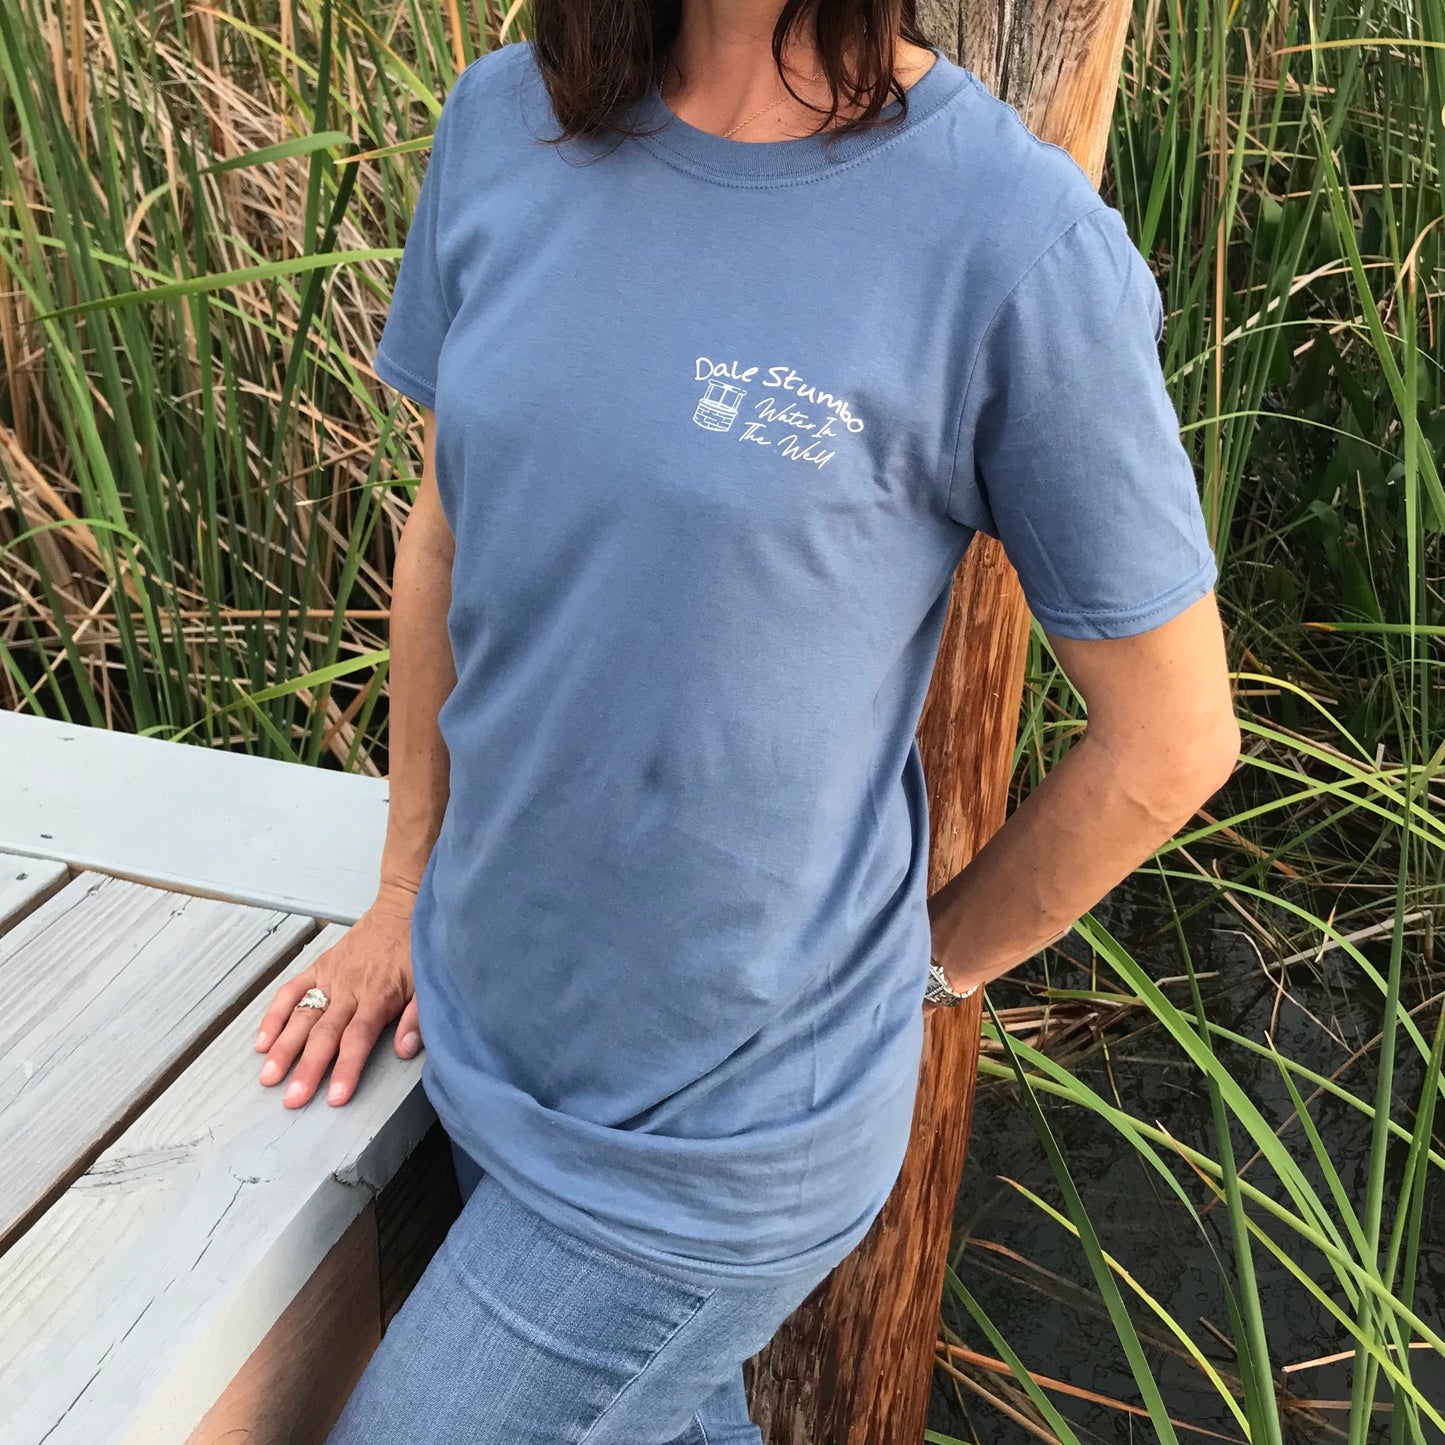 Water In The Well short sleeve tshirt